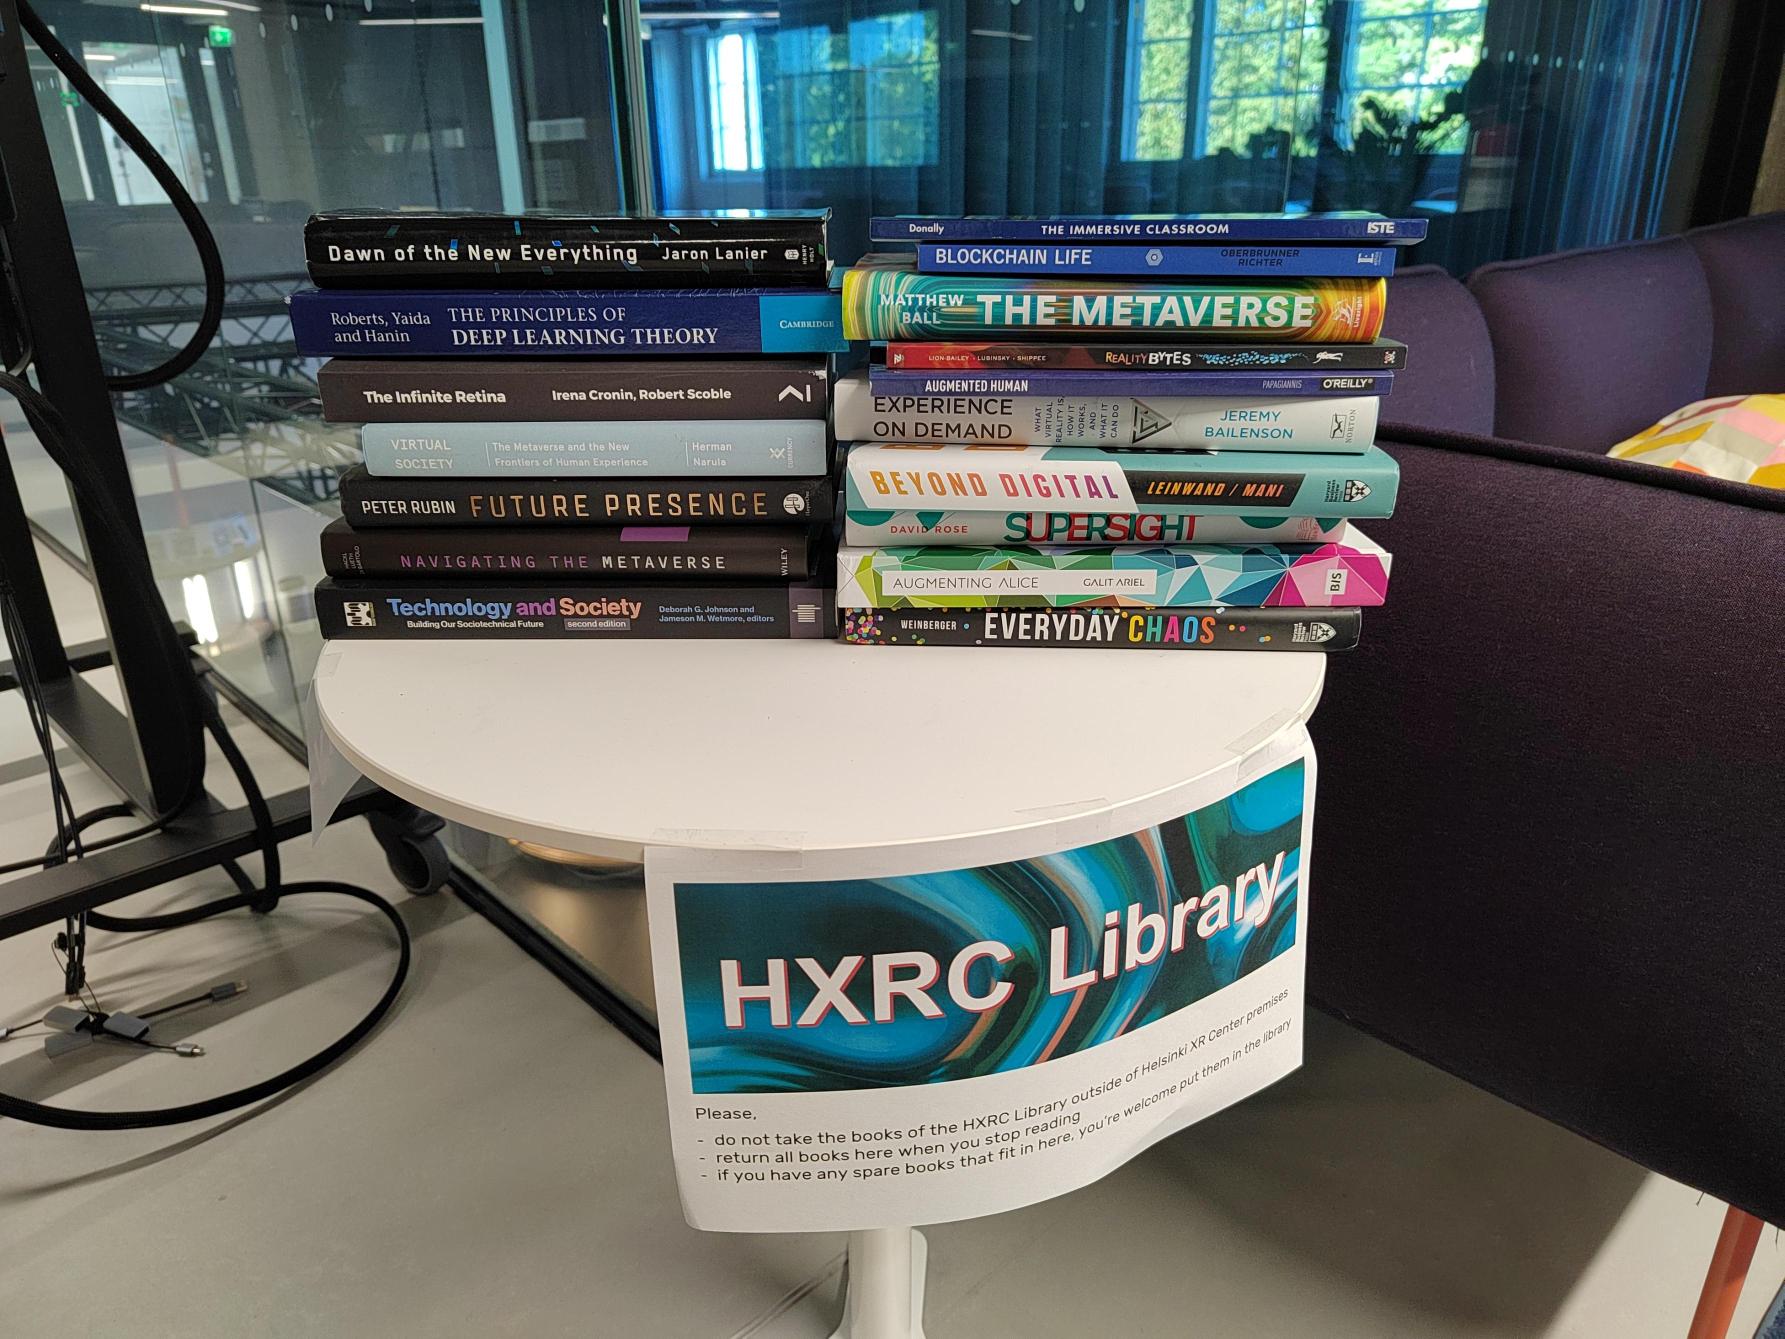 HXRC Library table with XR-related books.